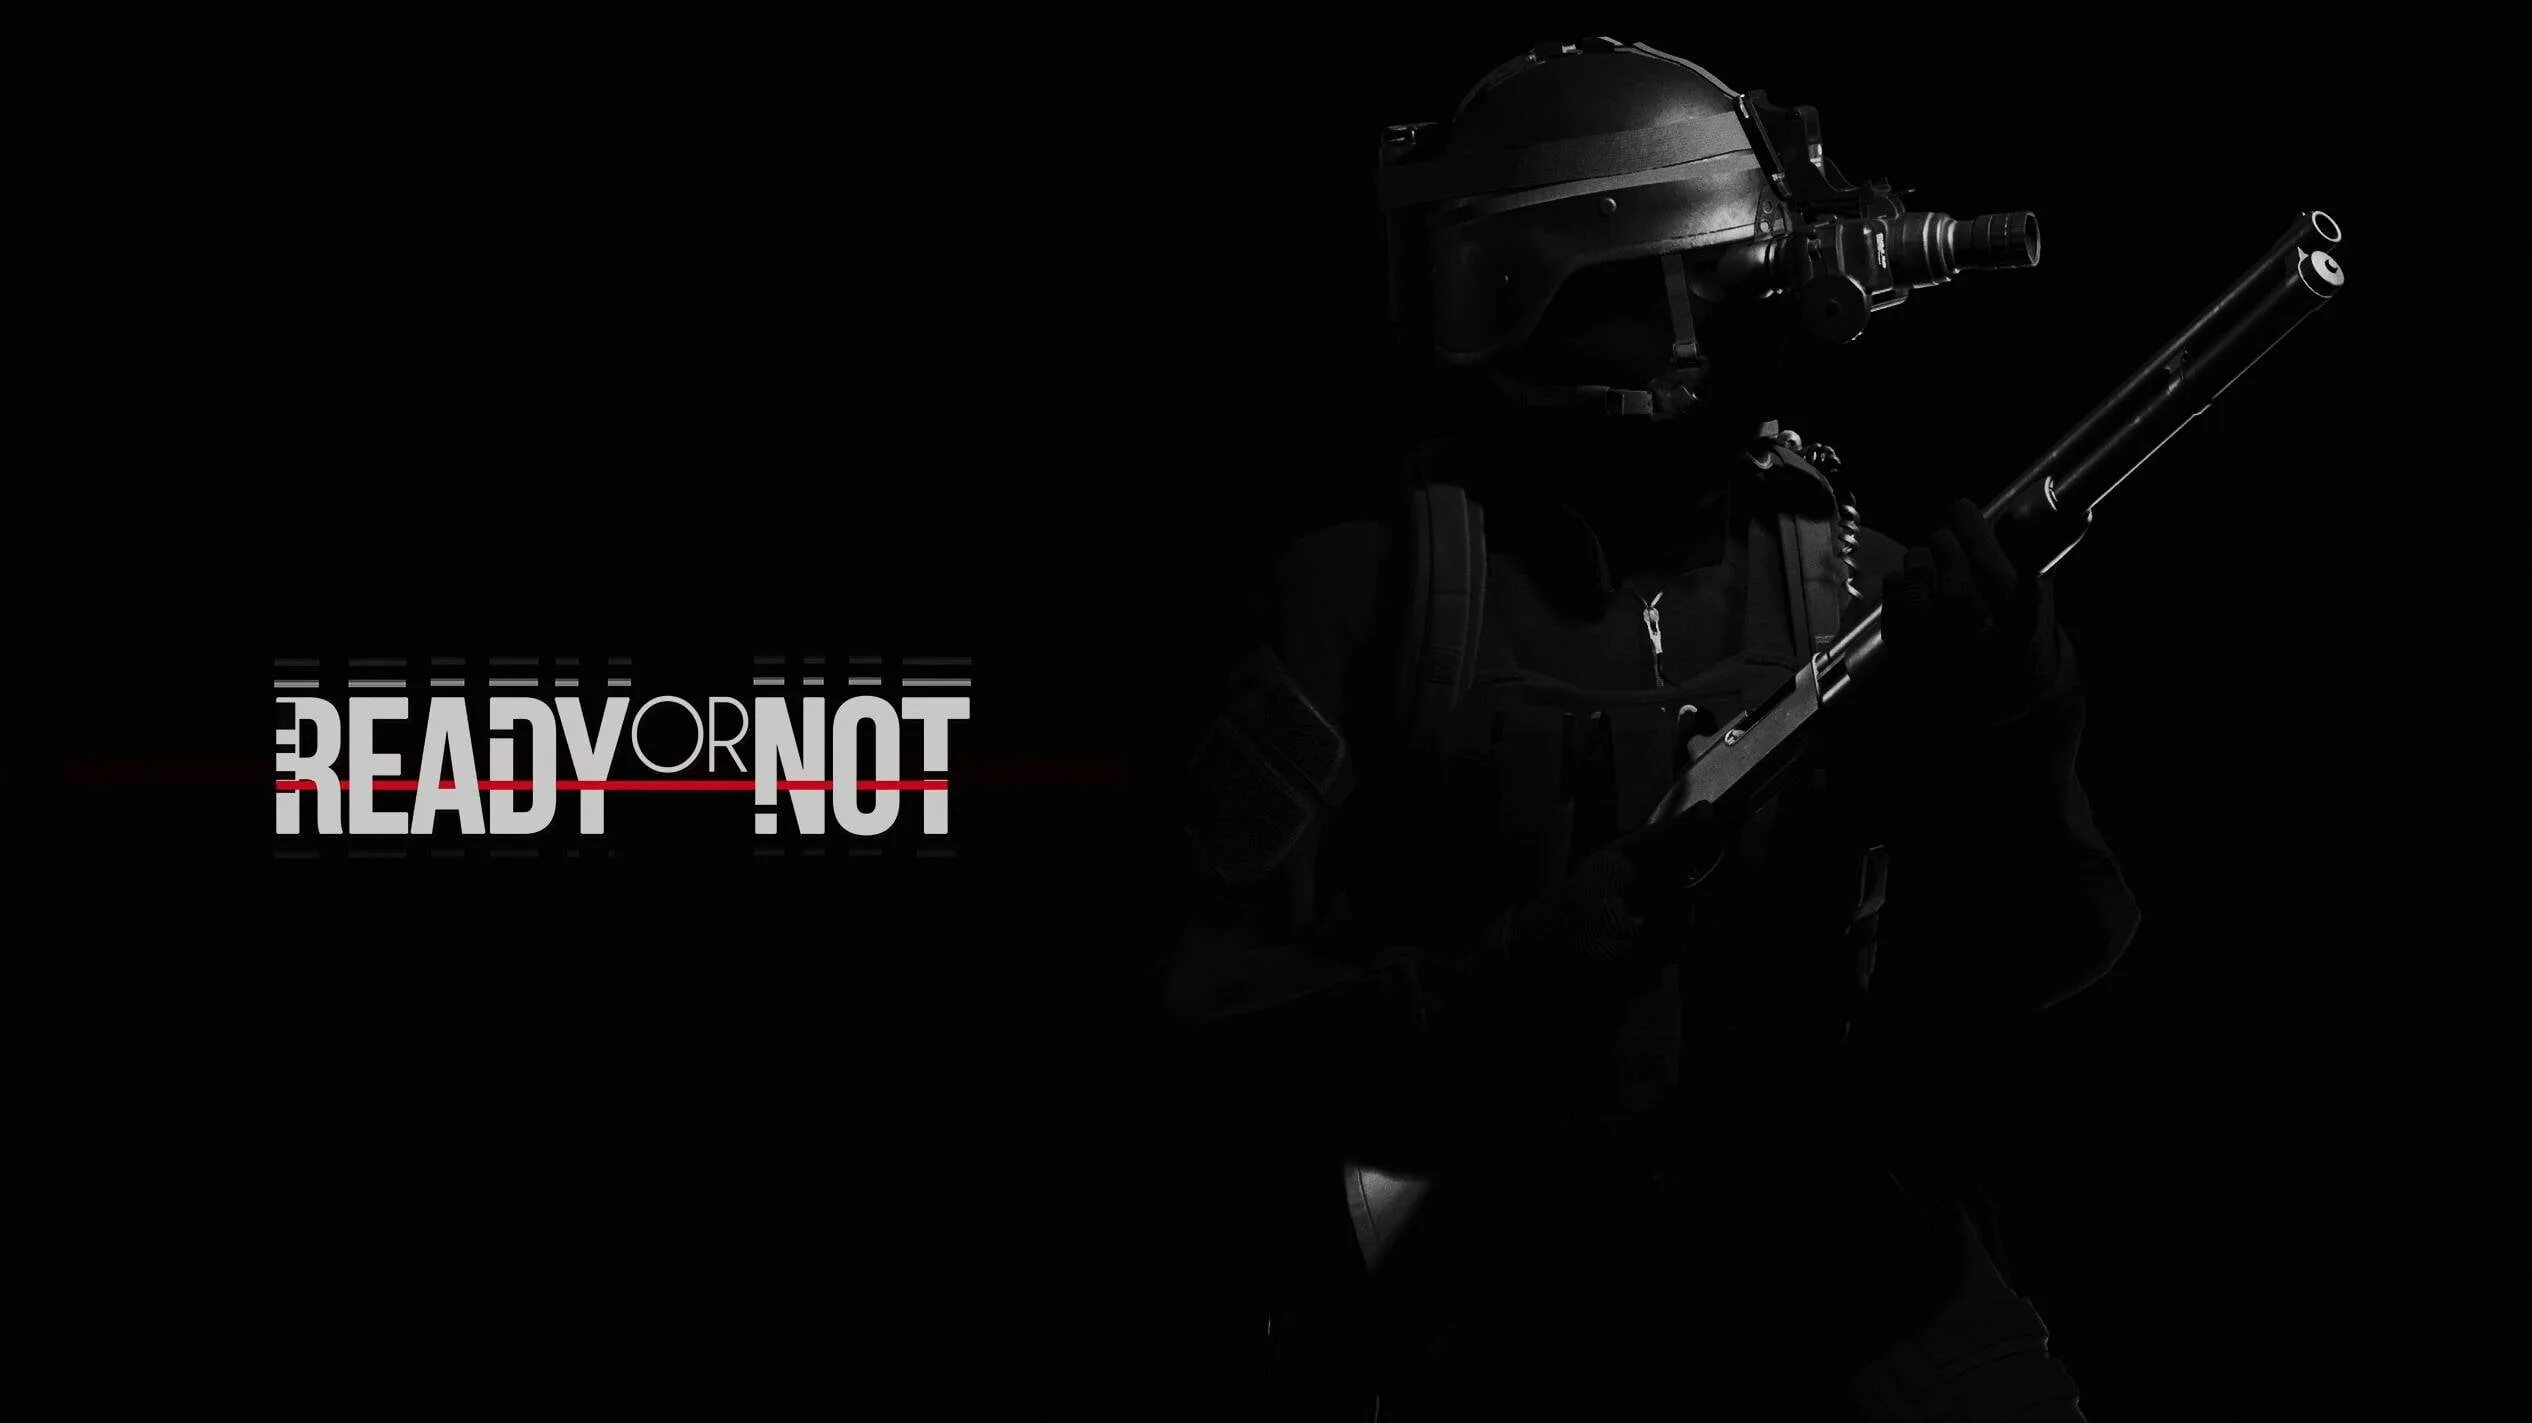 Ready or not язык. Ready or not фон. Ready or not игра. Ready or not обои. SWAT обои.